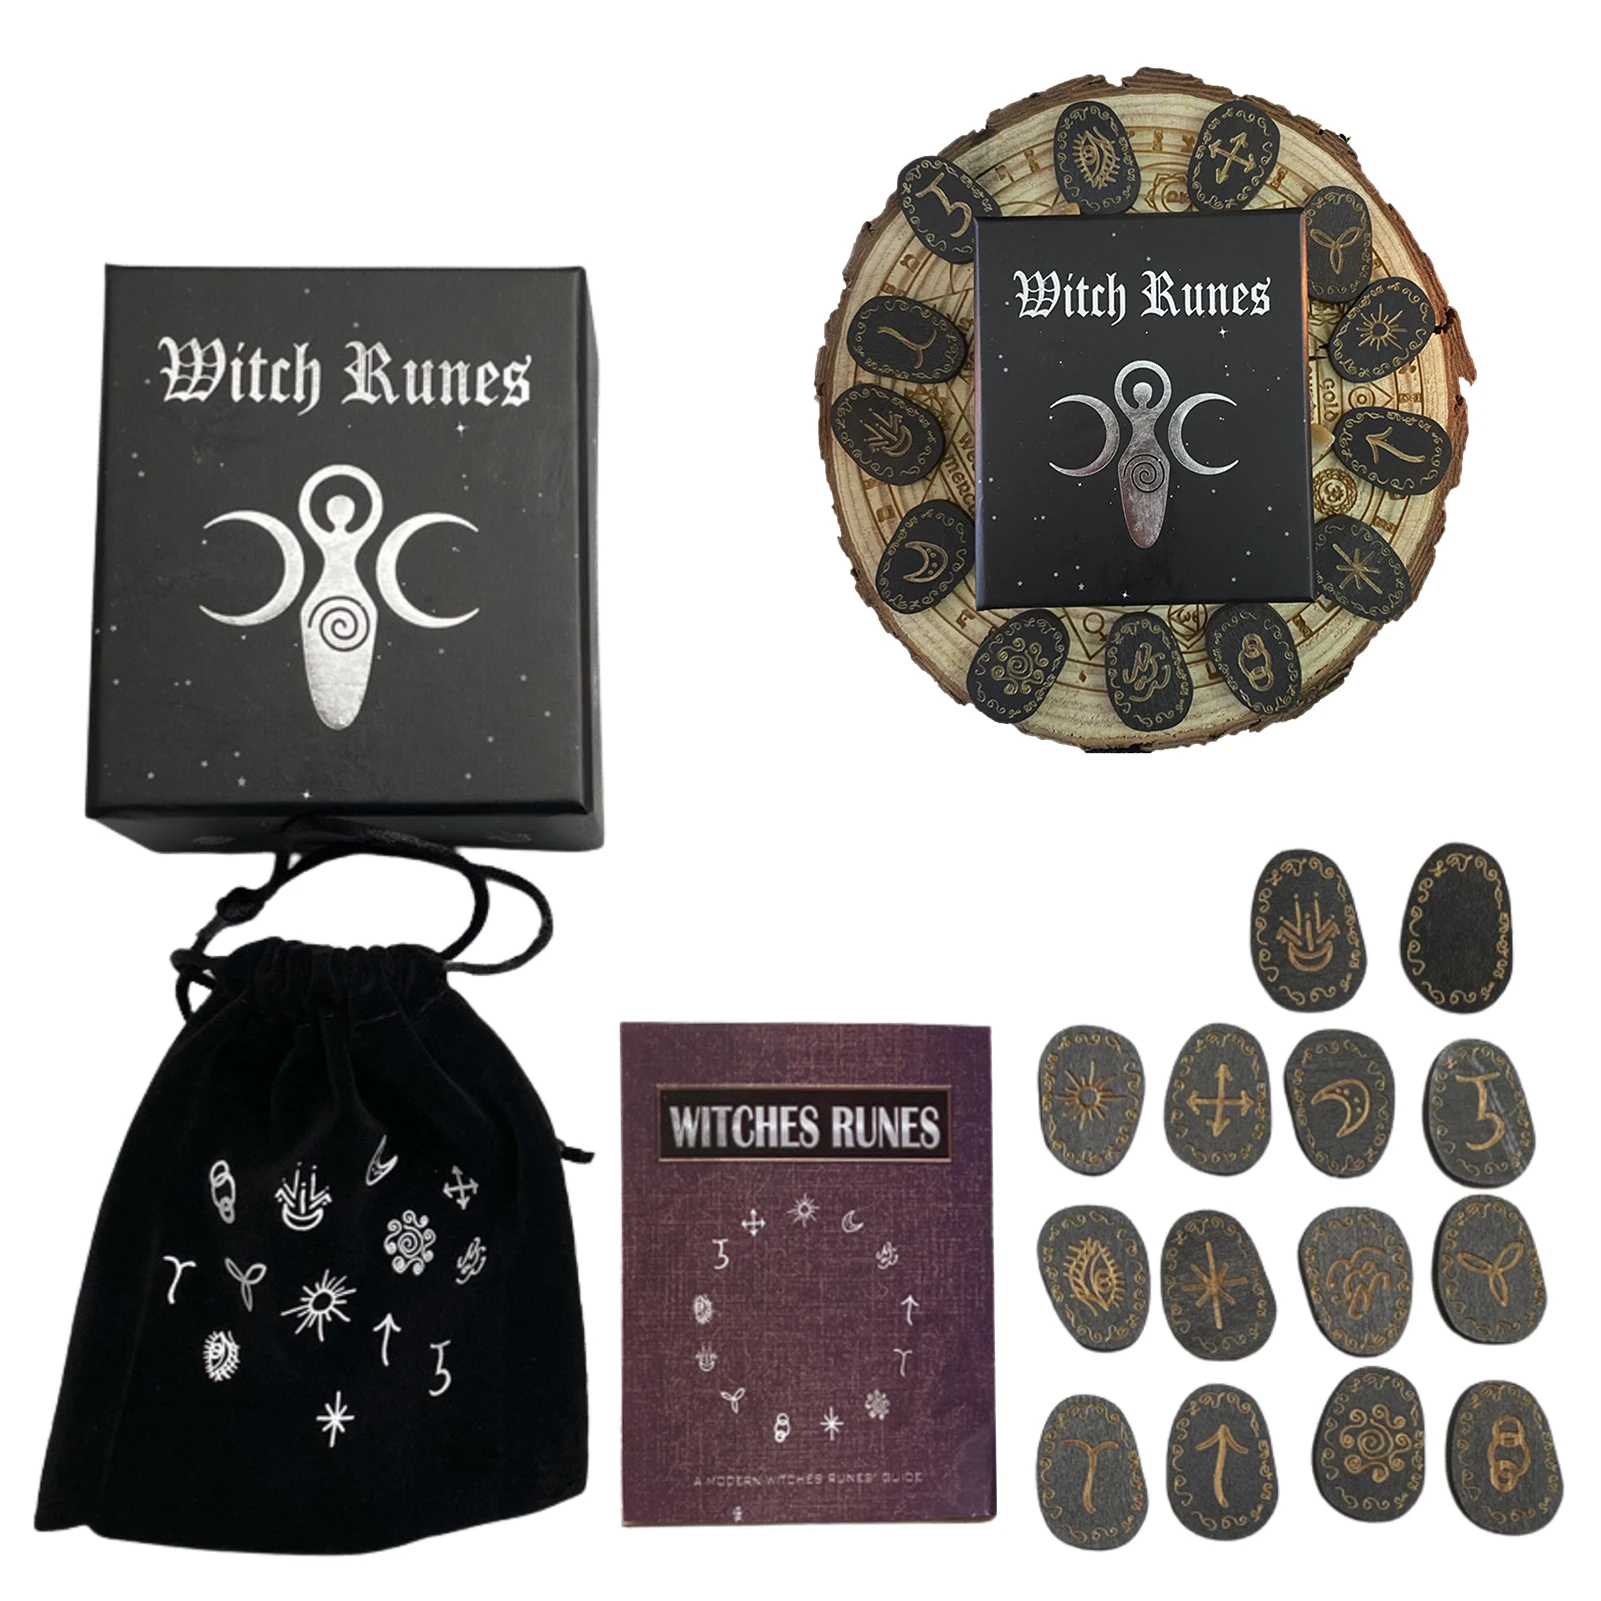 

16Pcs/set Wooden Witch Runes Stone Set Engraved Symbol For Meditation Divination Rune Stones Set With Storage Bag Tablecloth